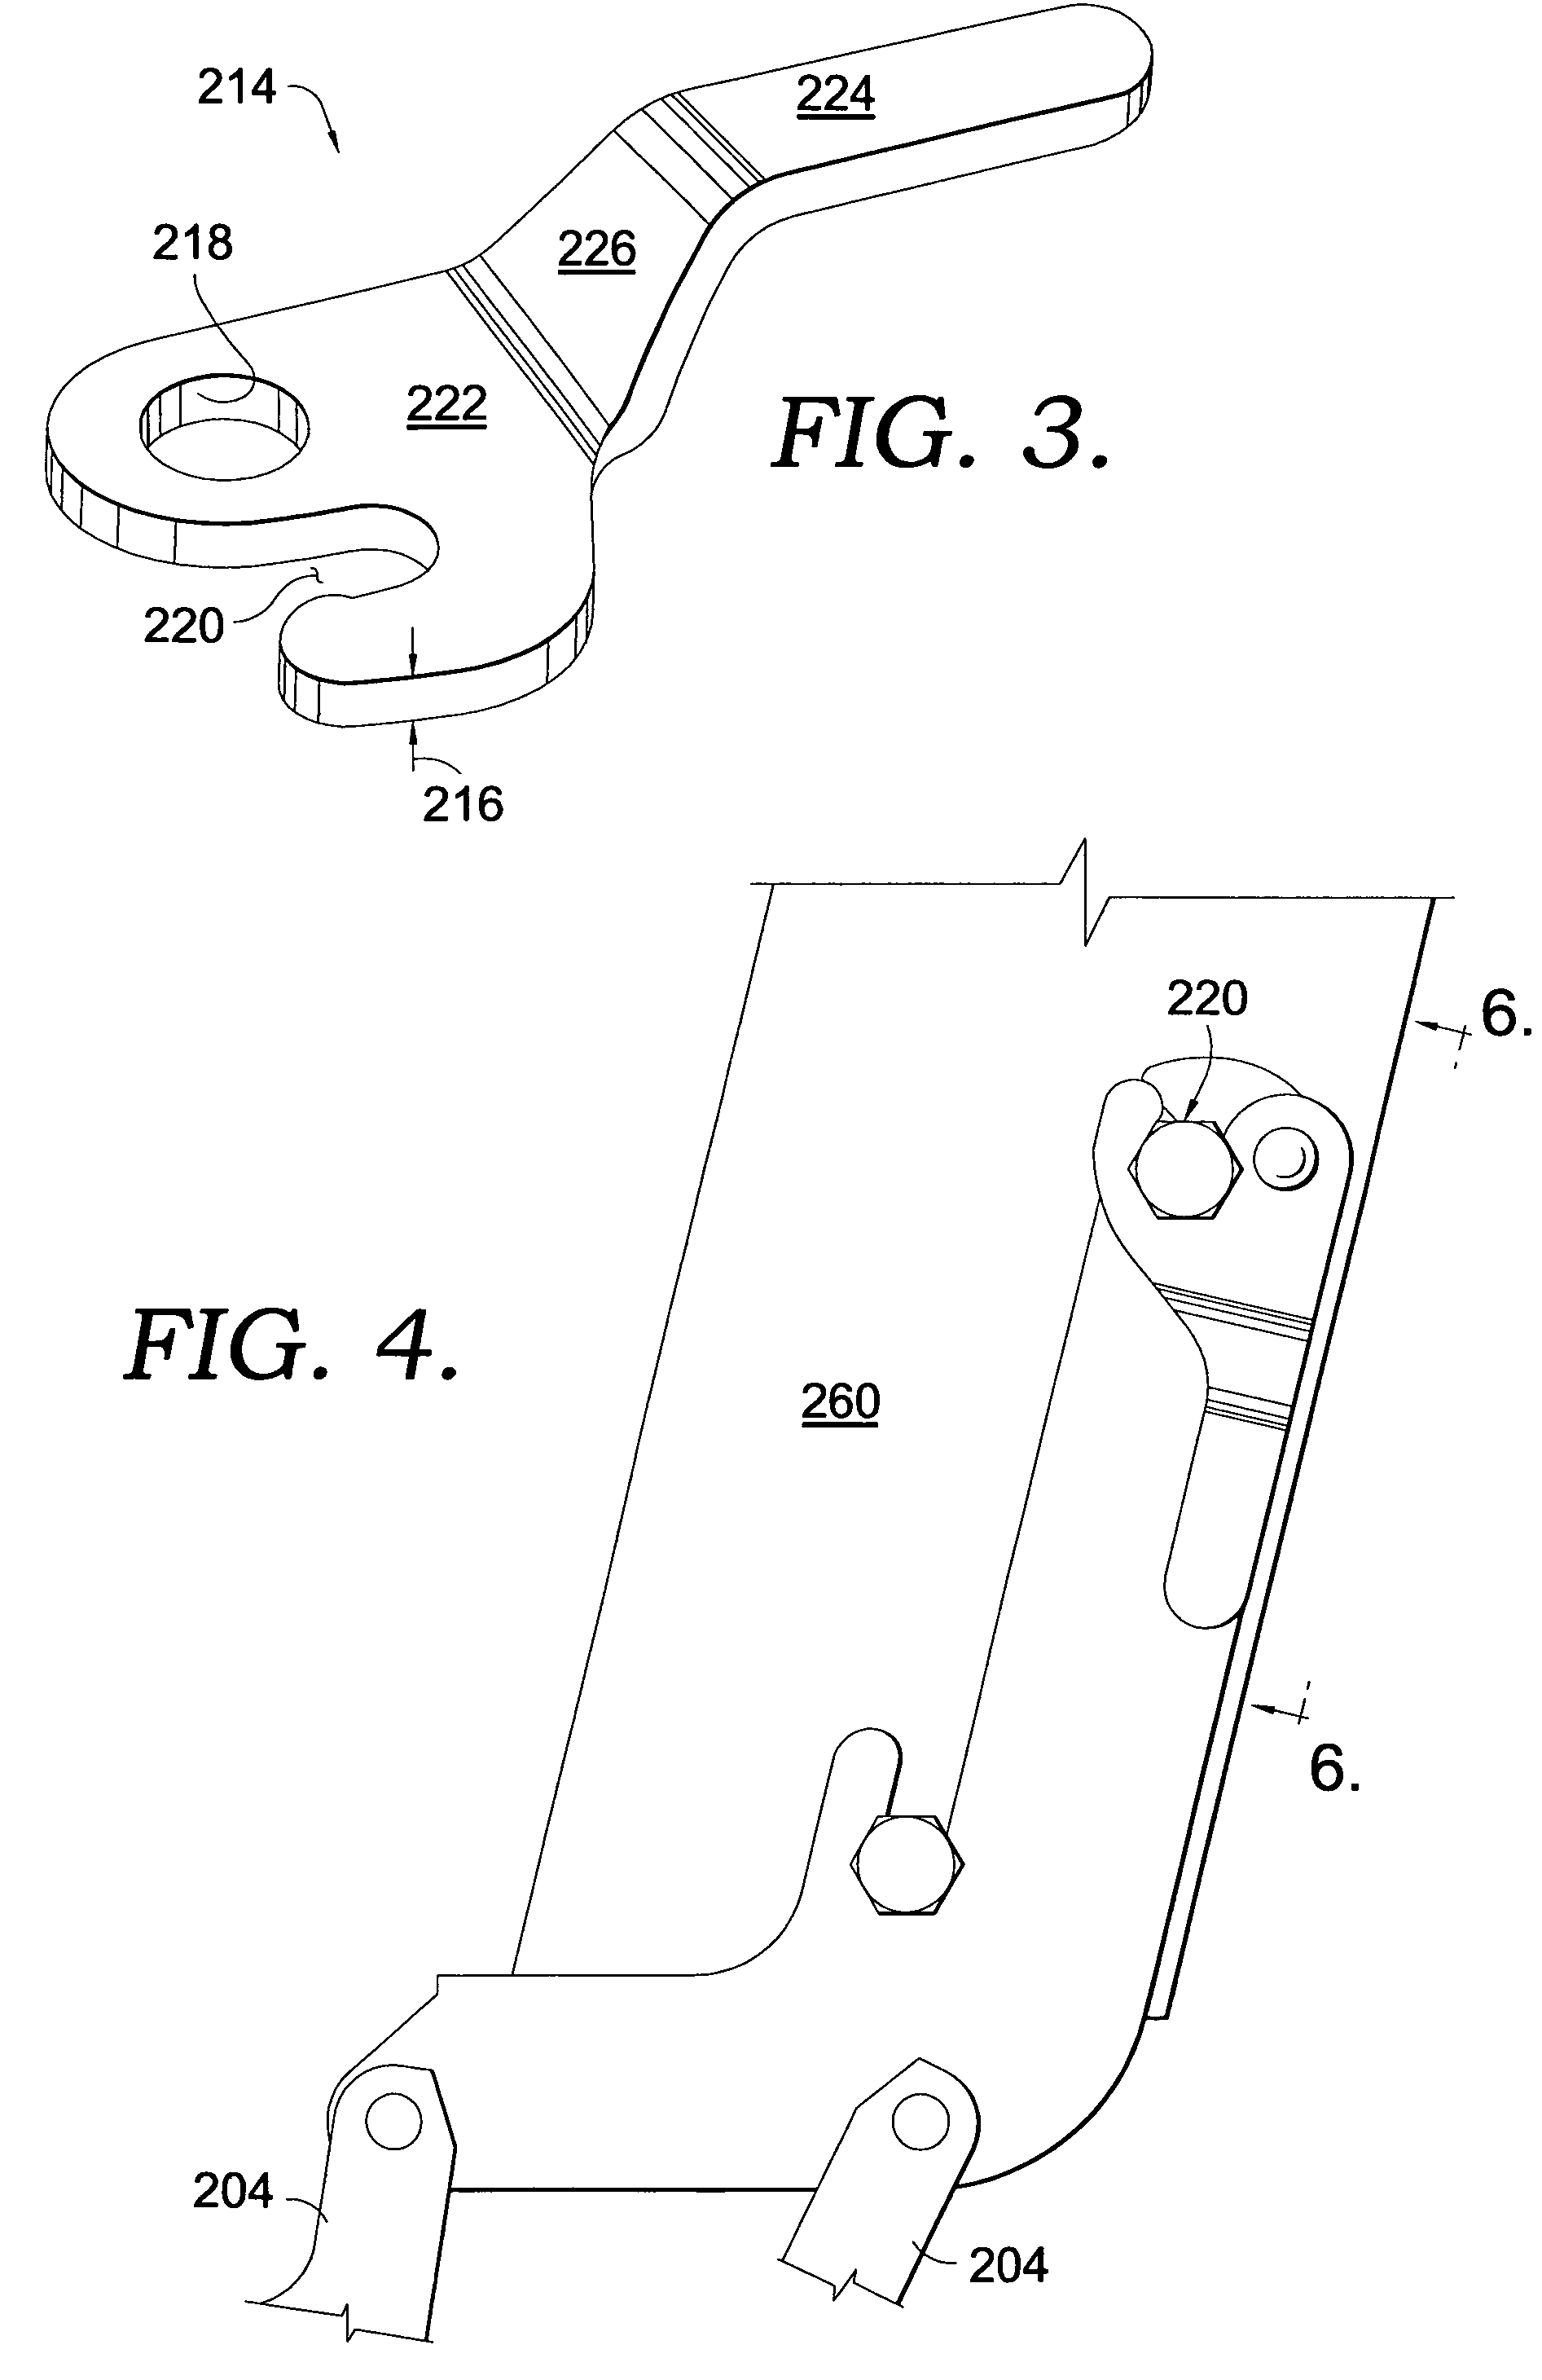 Knockdown attachment mechanism for a reclining chair